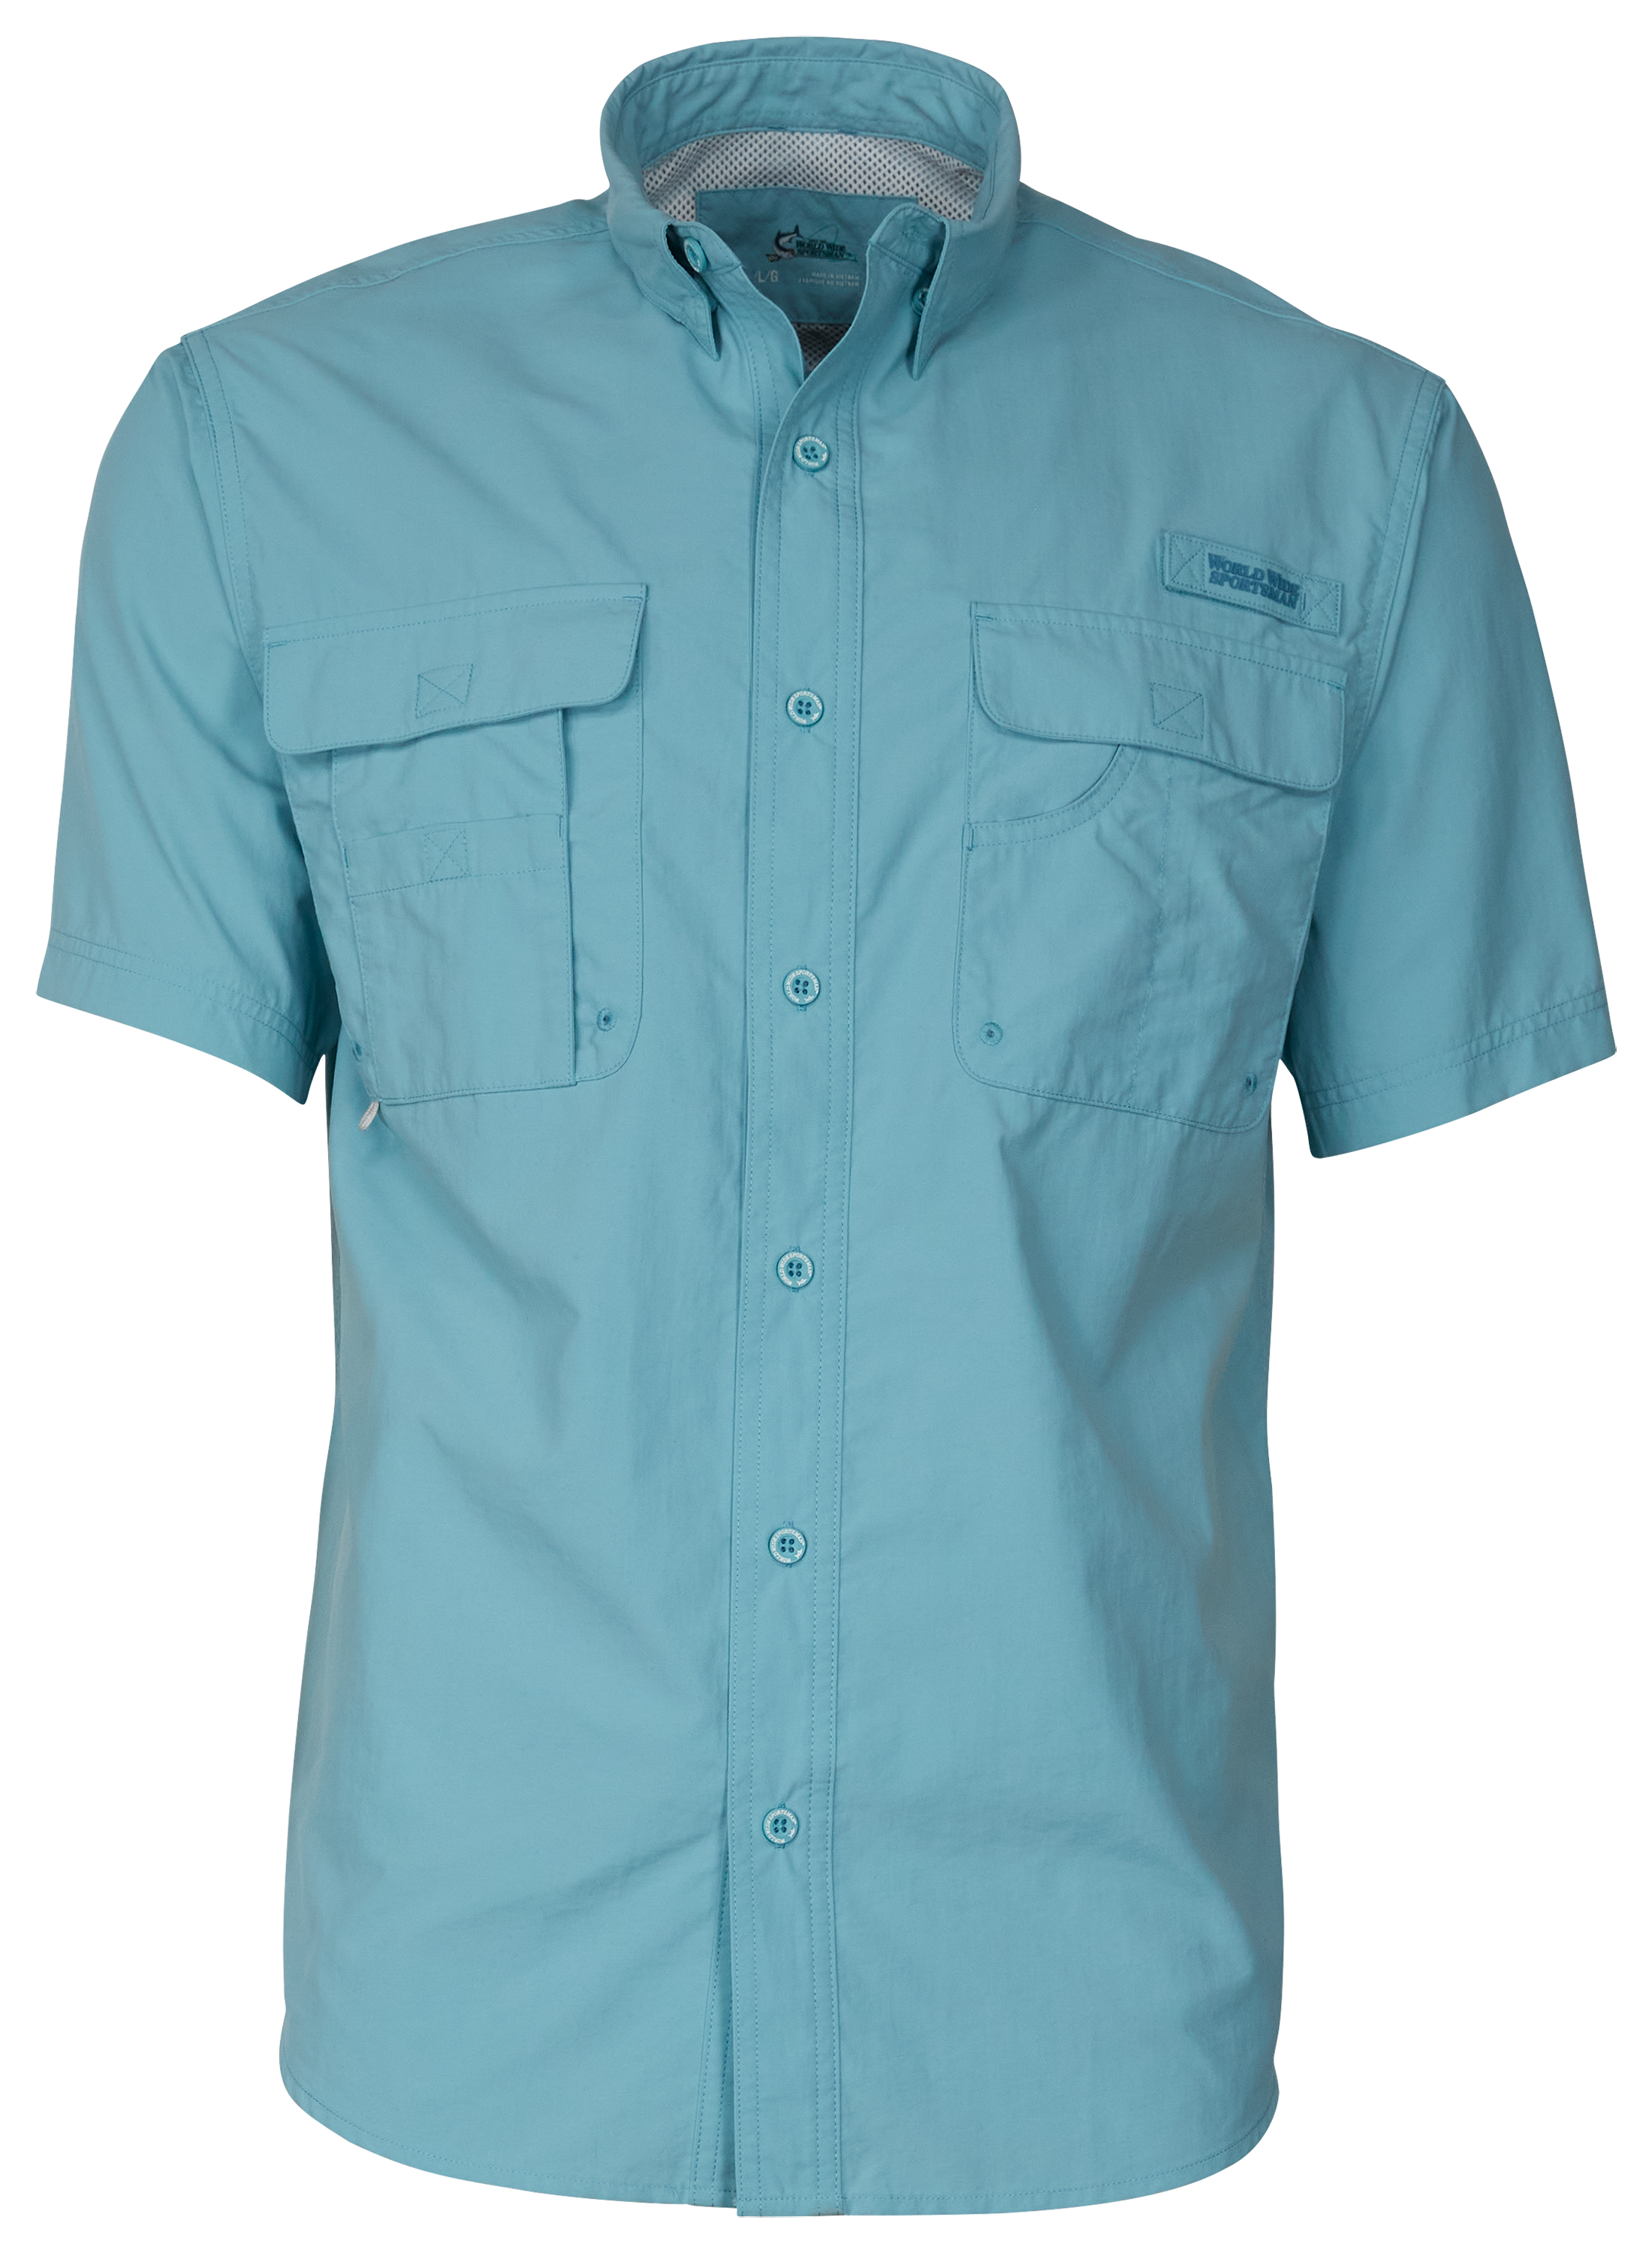 World Wide Sportsman Recycled-Nylon Angler 2.0 Short-Sleeve Button-Down Shirt for Men - Reef Waters - S